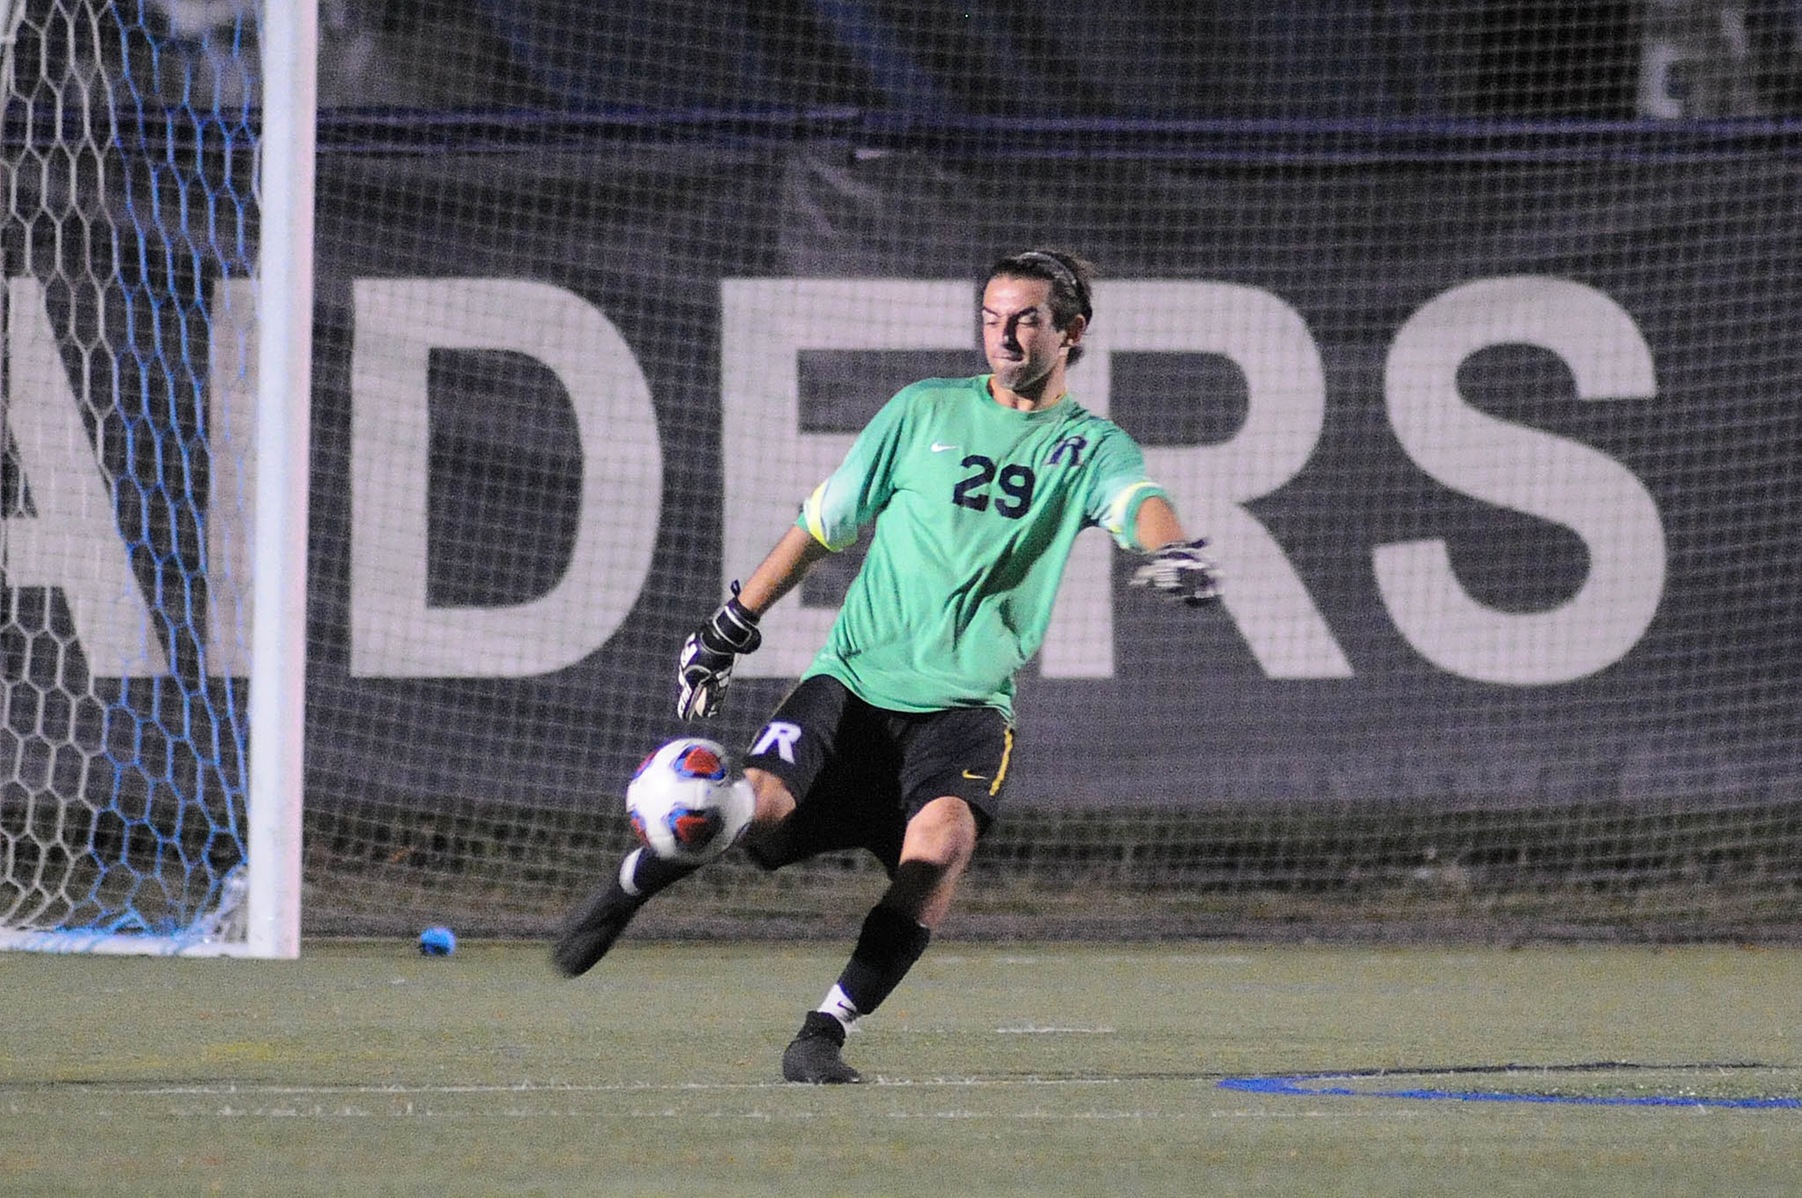 Men's Soccer: Hasenfus guides Raiders to 0-0 tie vs Fitchburg State